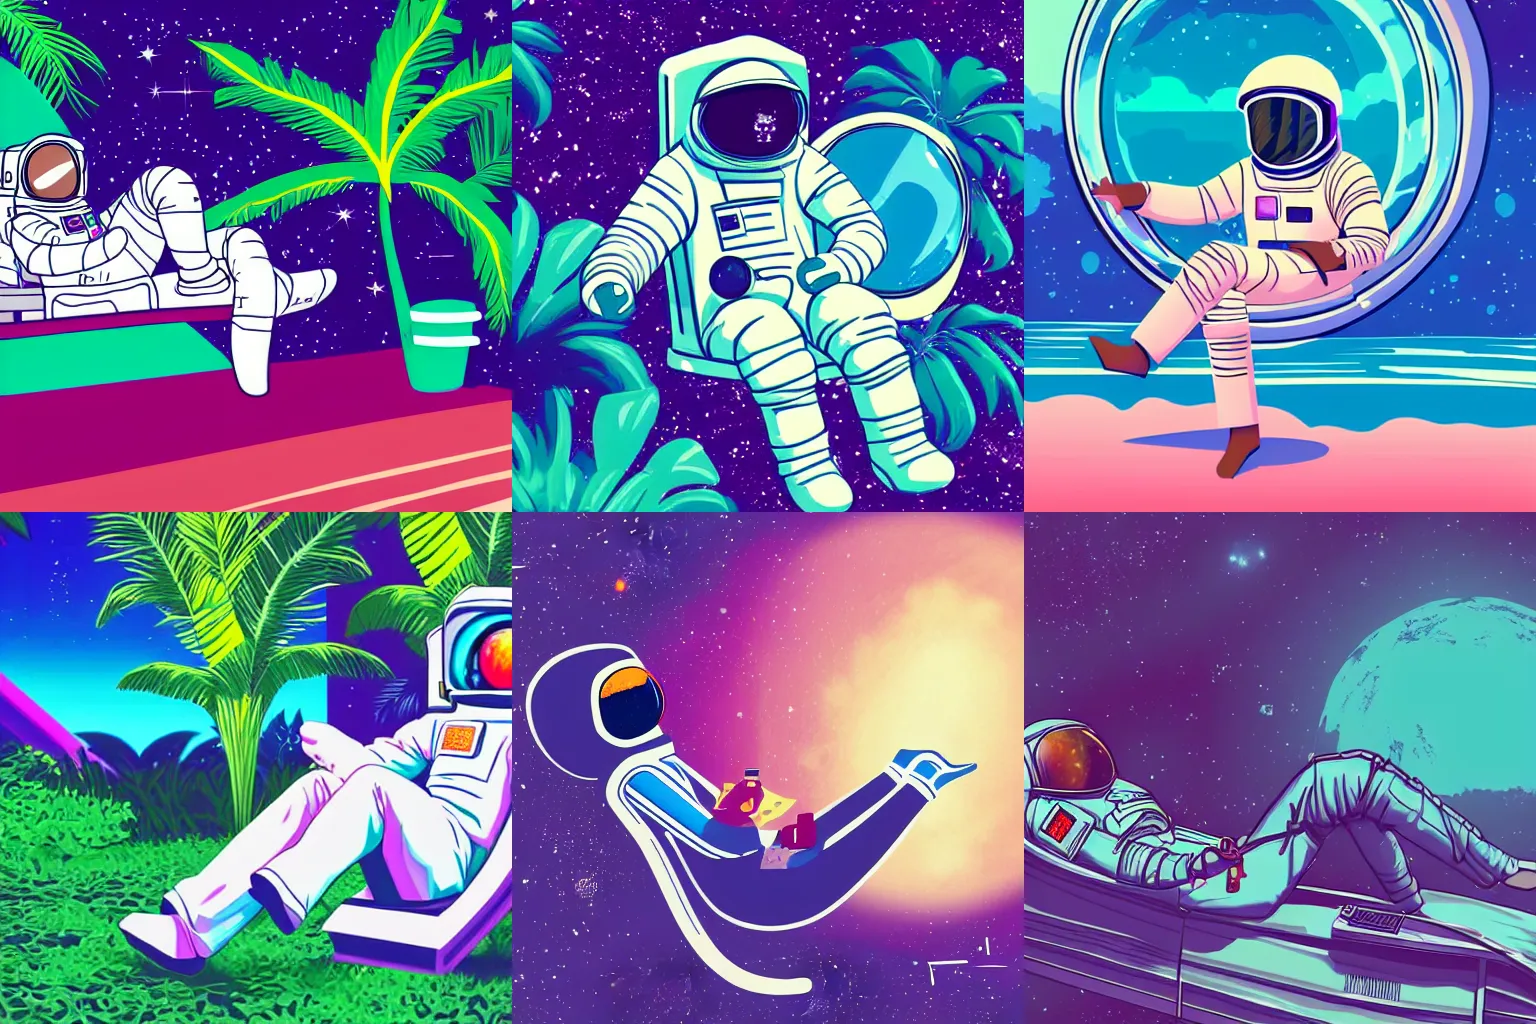 Prompt: an astronaut lounging in a tropical resort in space in a vaporwave style